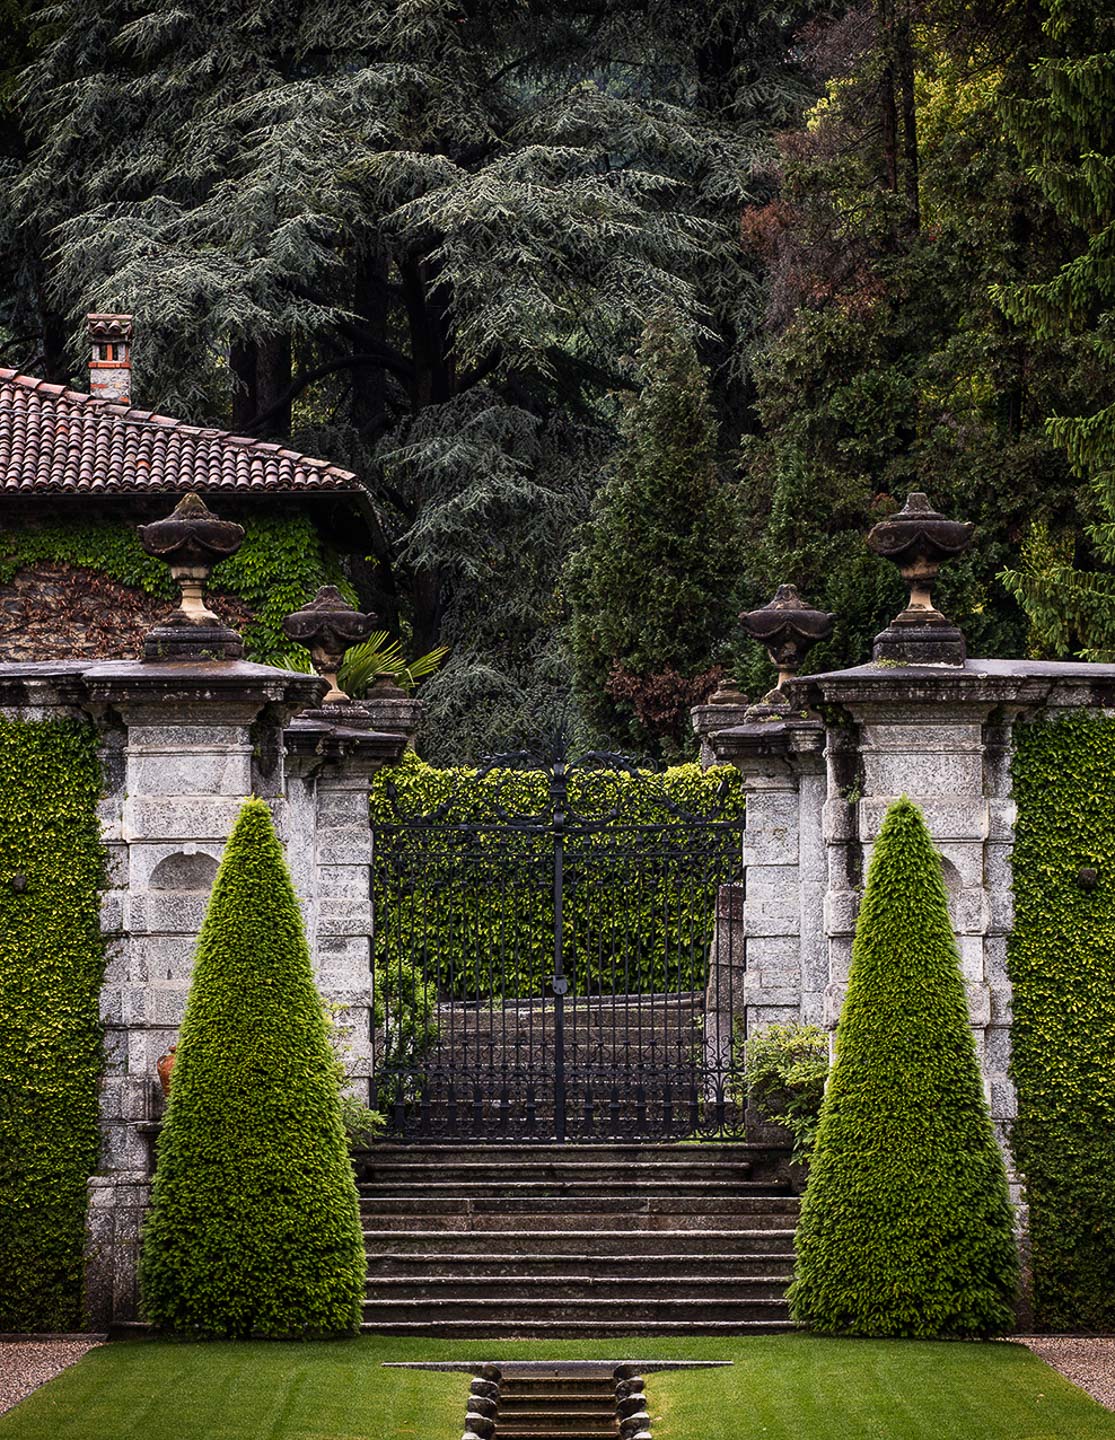 Villa Balbiano luxury property Lake Como Italy main original beautiful famous gate cardinale Durini residence 17 century access wedding ceremony exclusive events guests